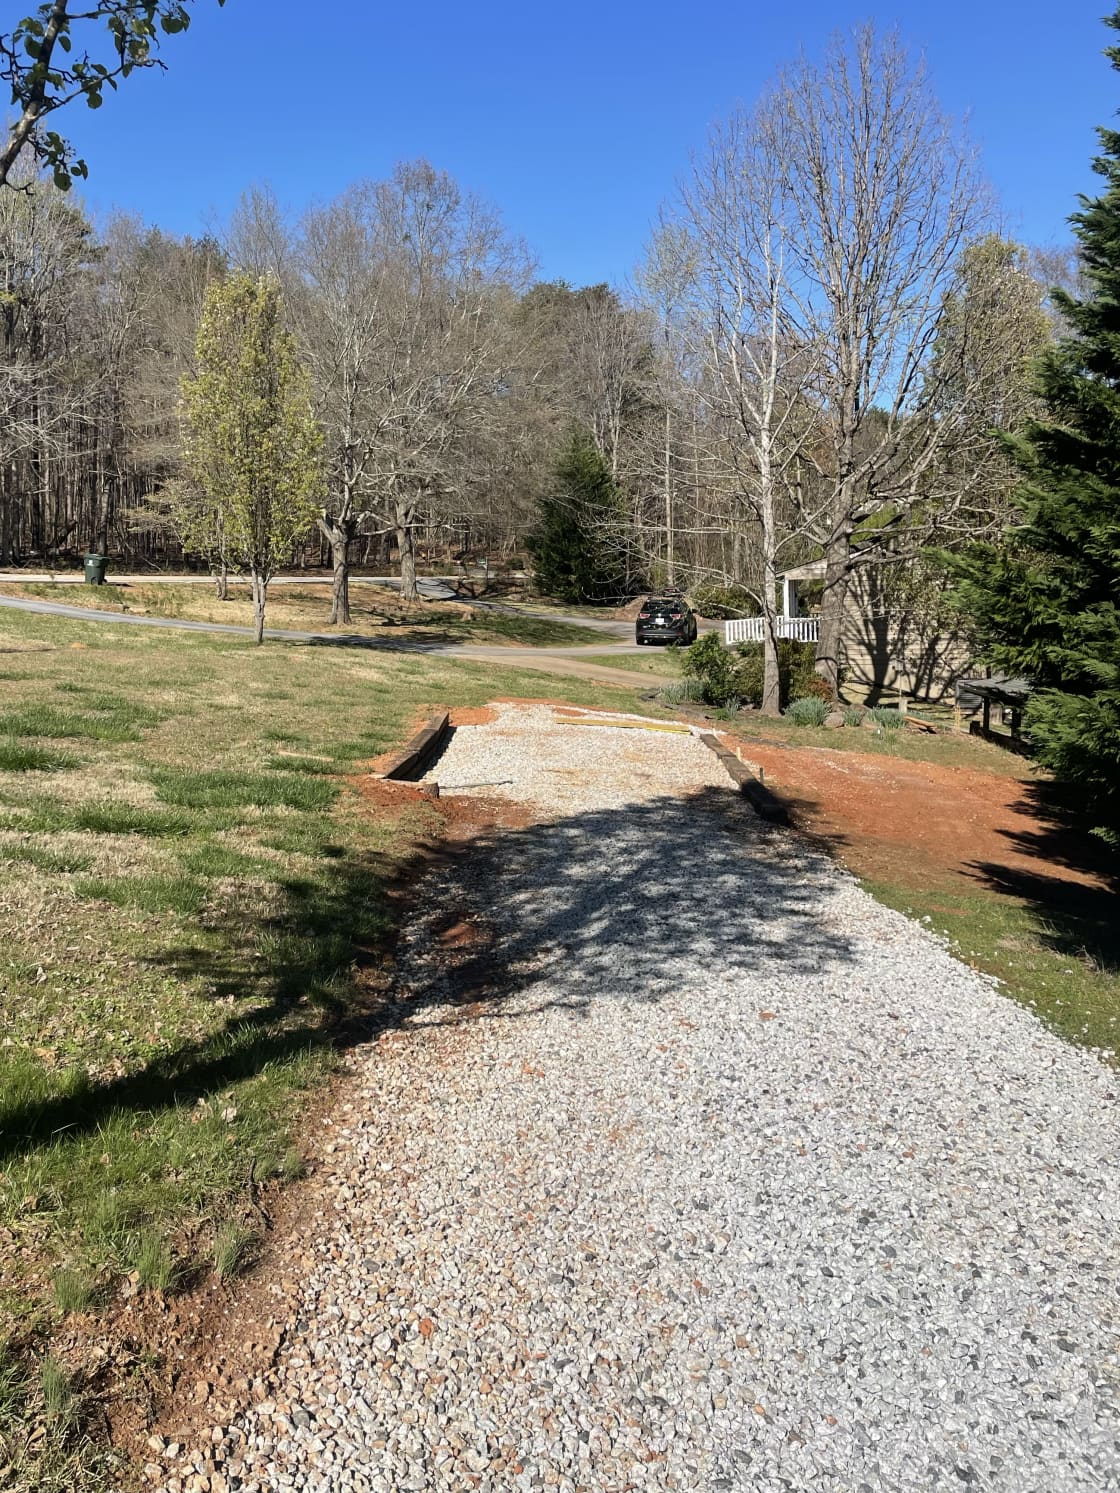 Site was updated and widen in March 2023. Grass has been planted. More updates coming. Message us for more more recent photos.